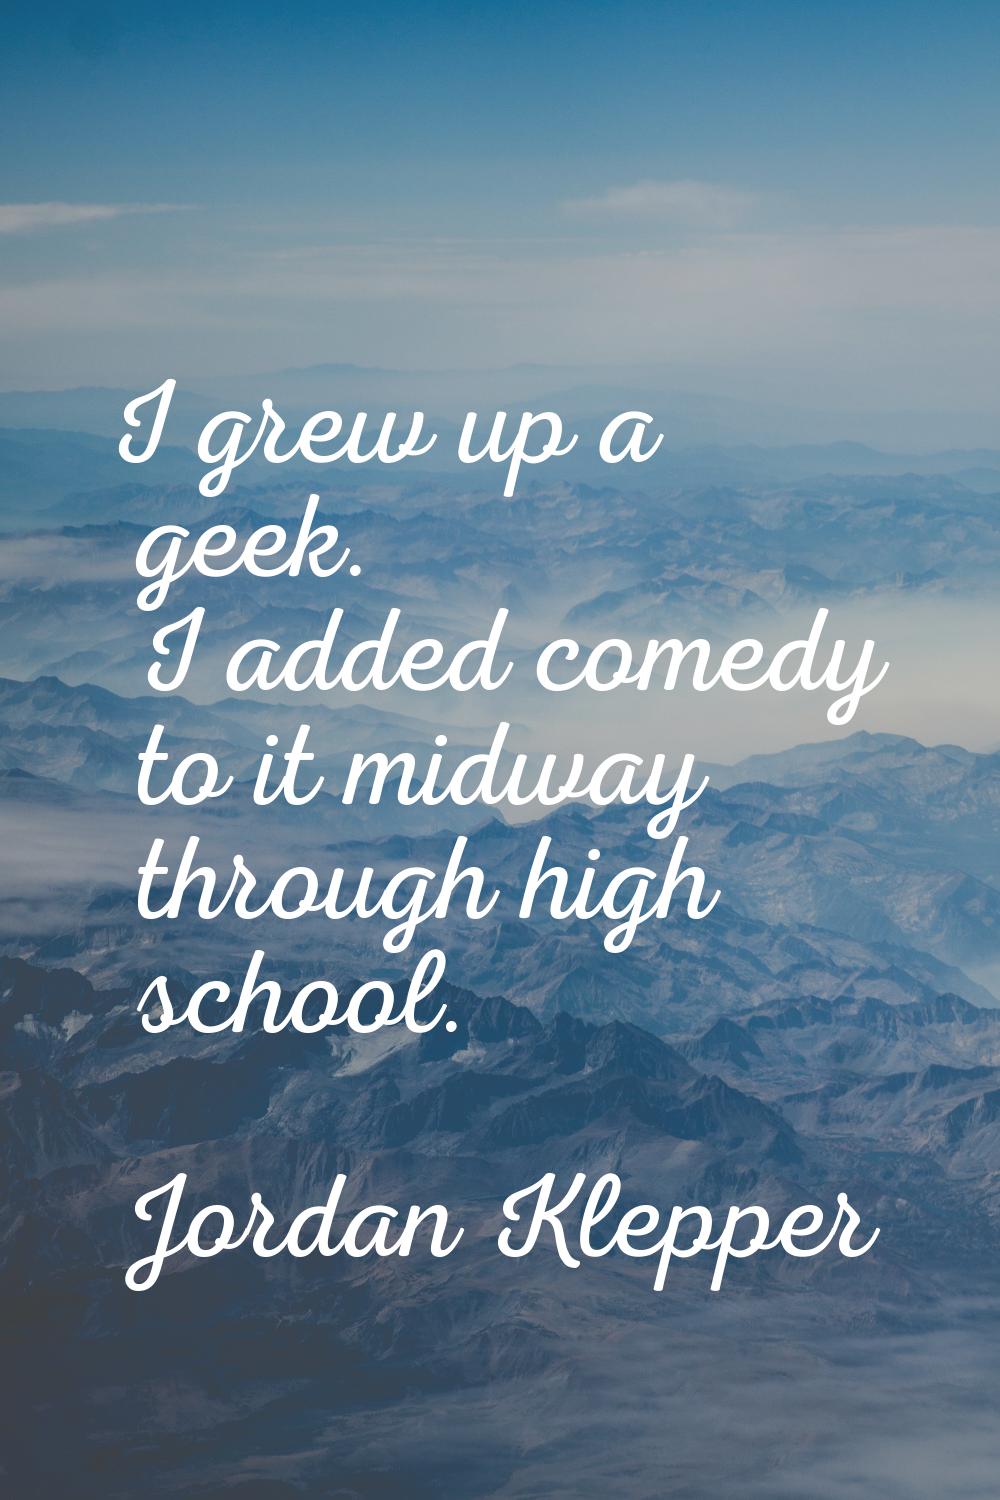 I grew up a geek. I added comedy to it midway through high school.